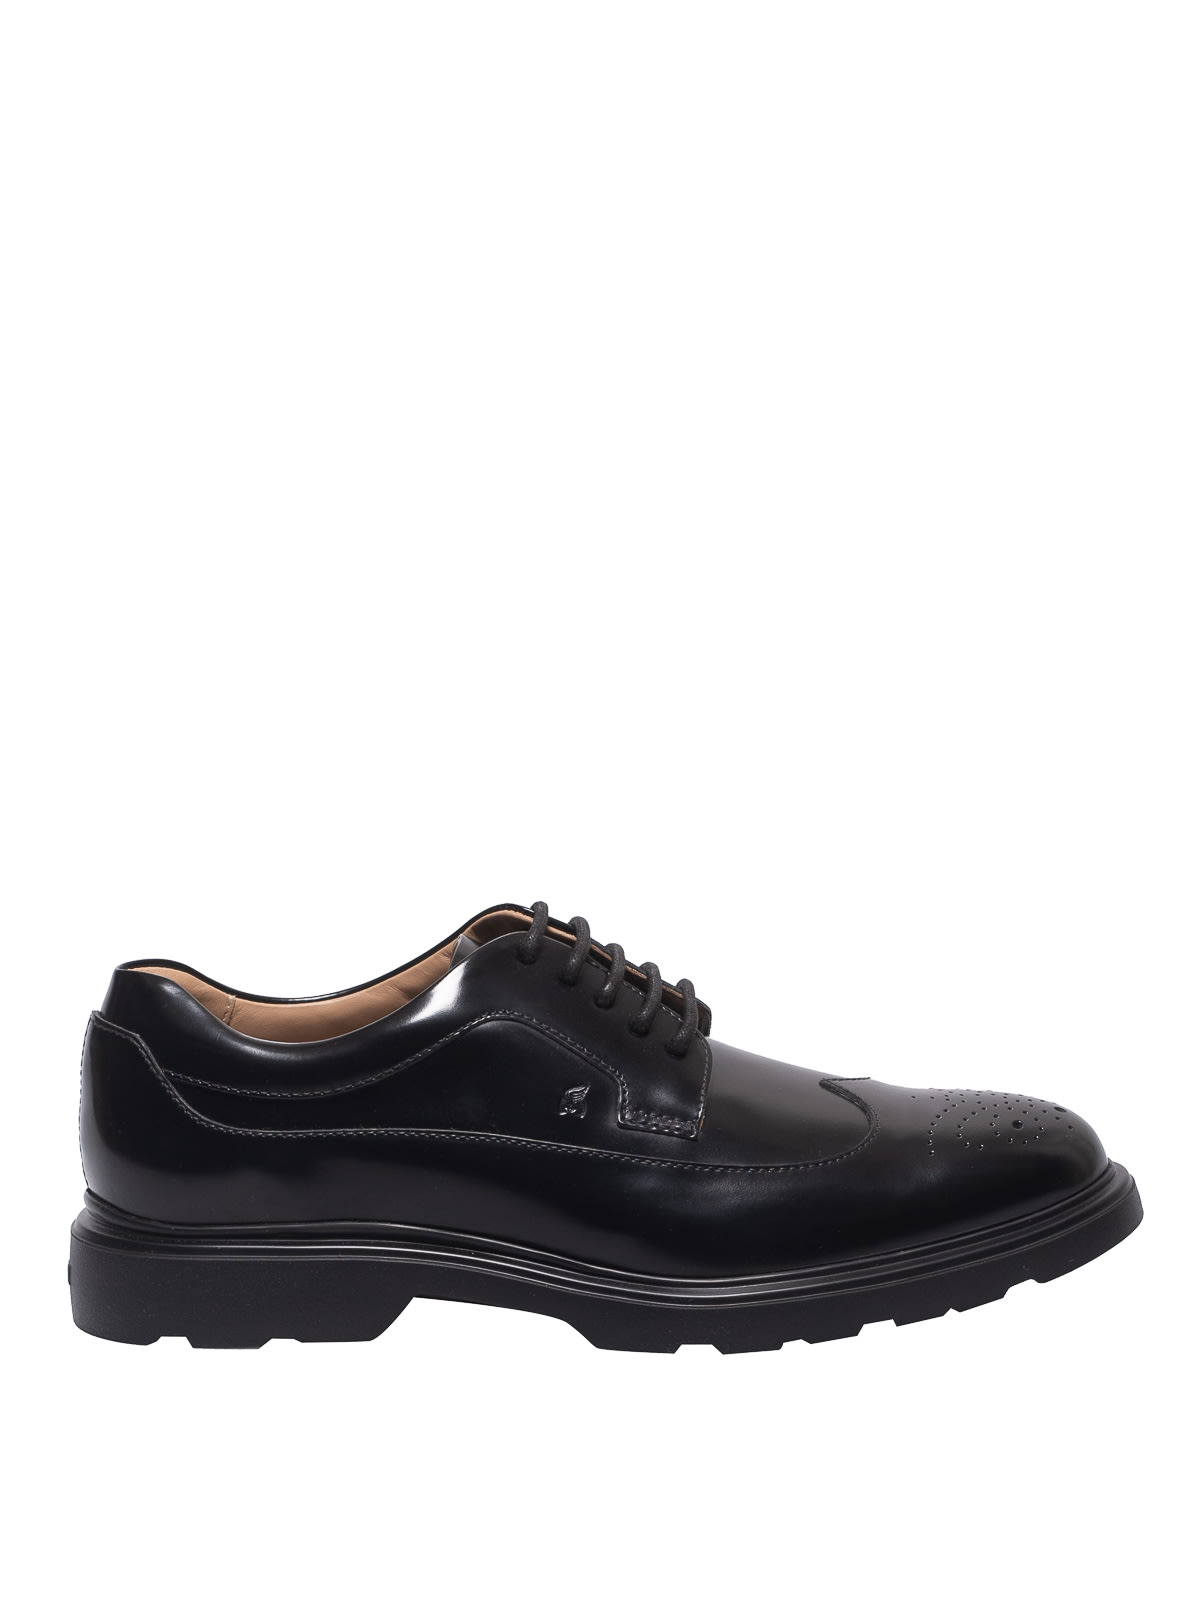 Hogan H393 Derby Brogue Shoes In Black Leather